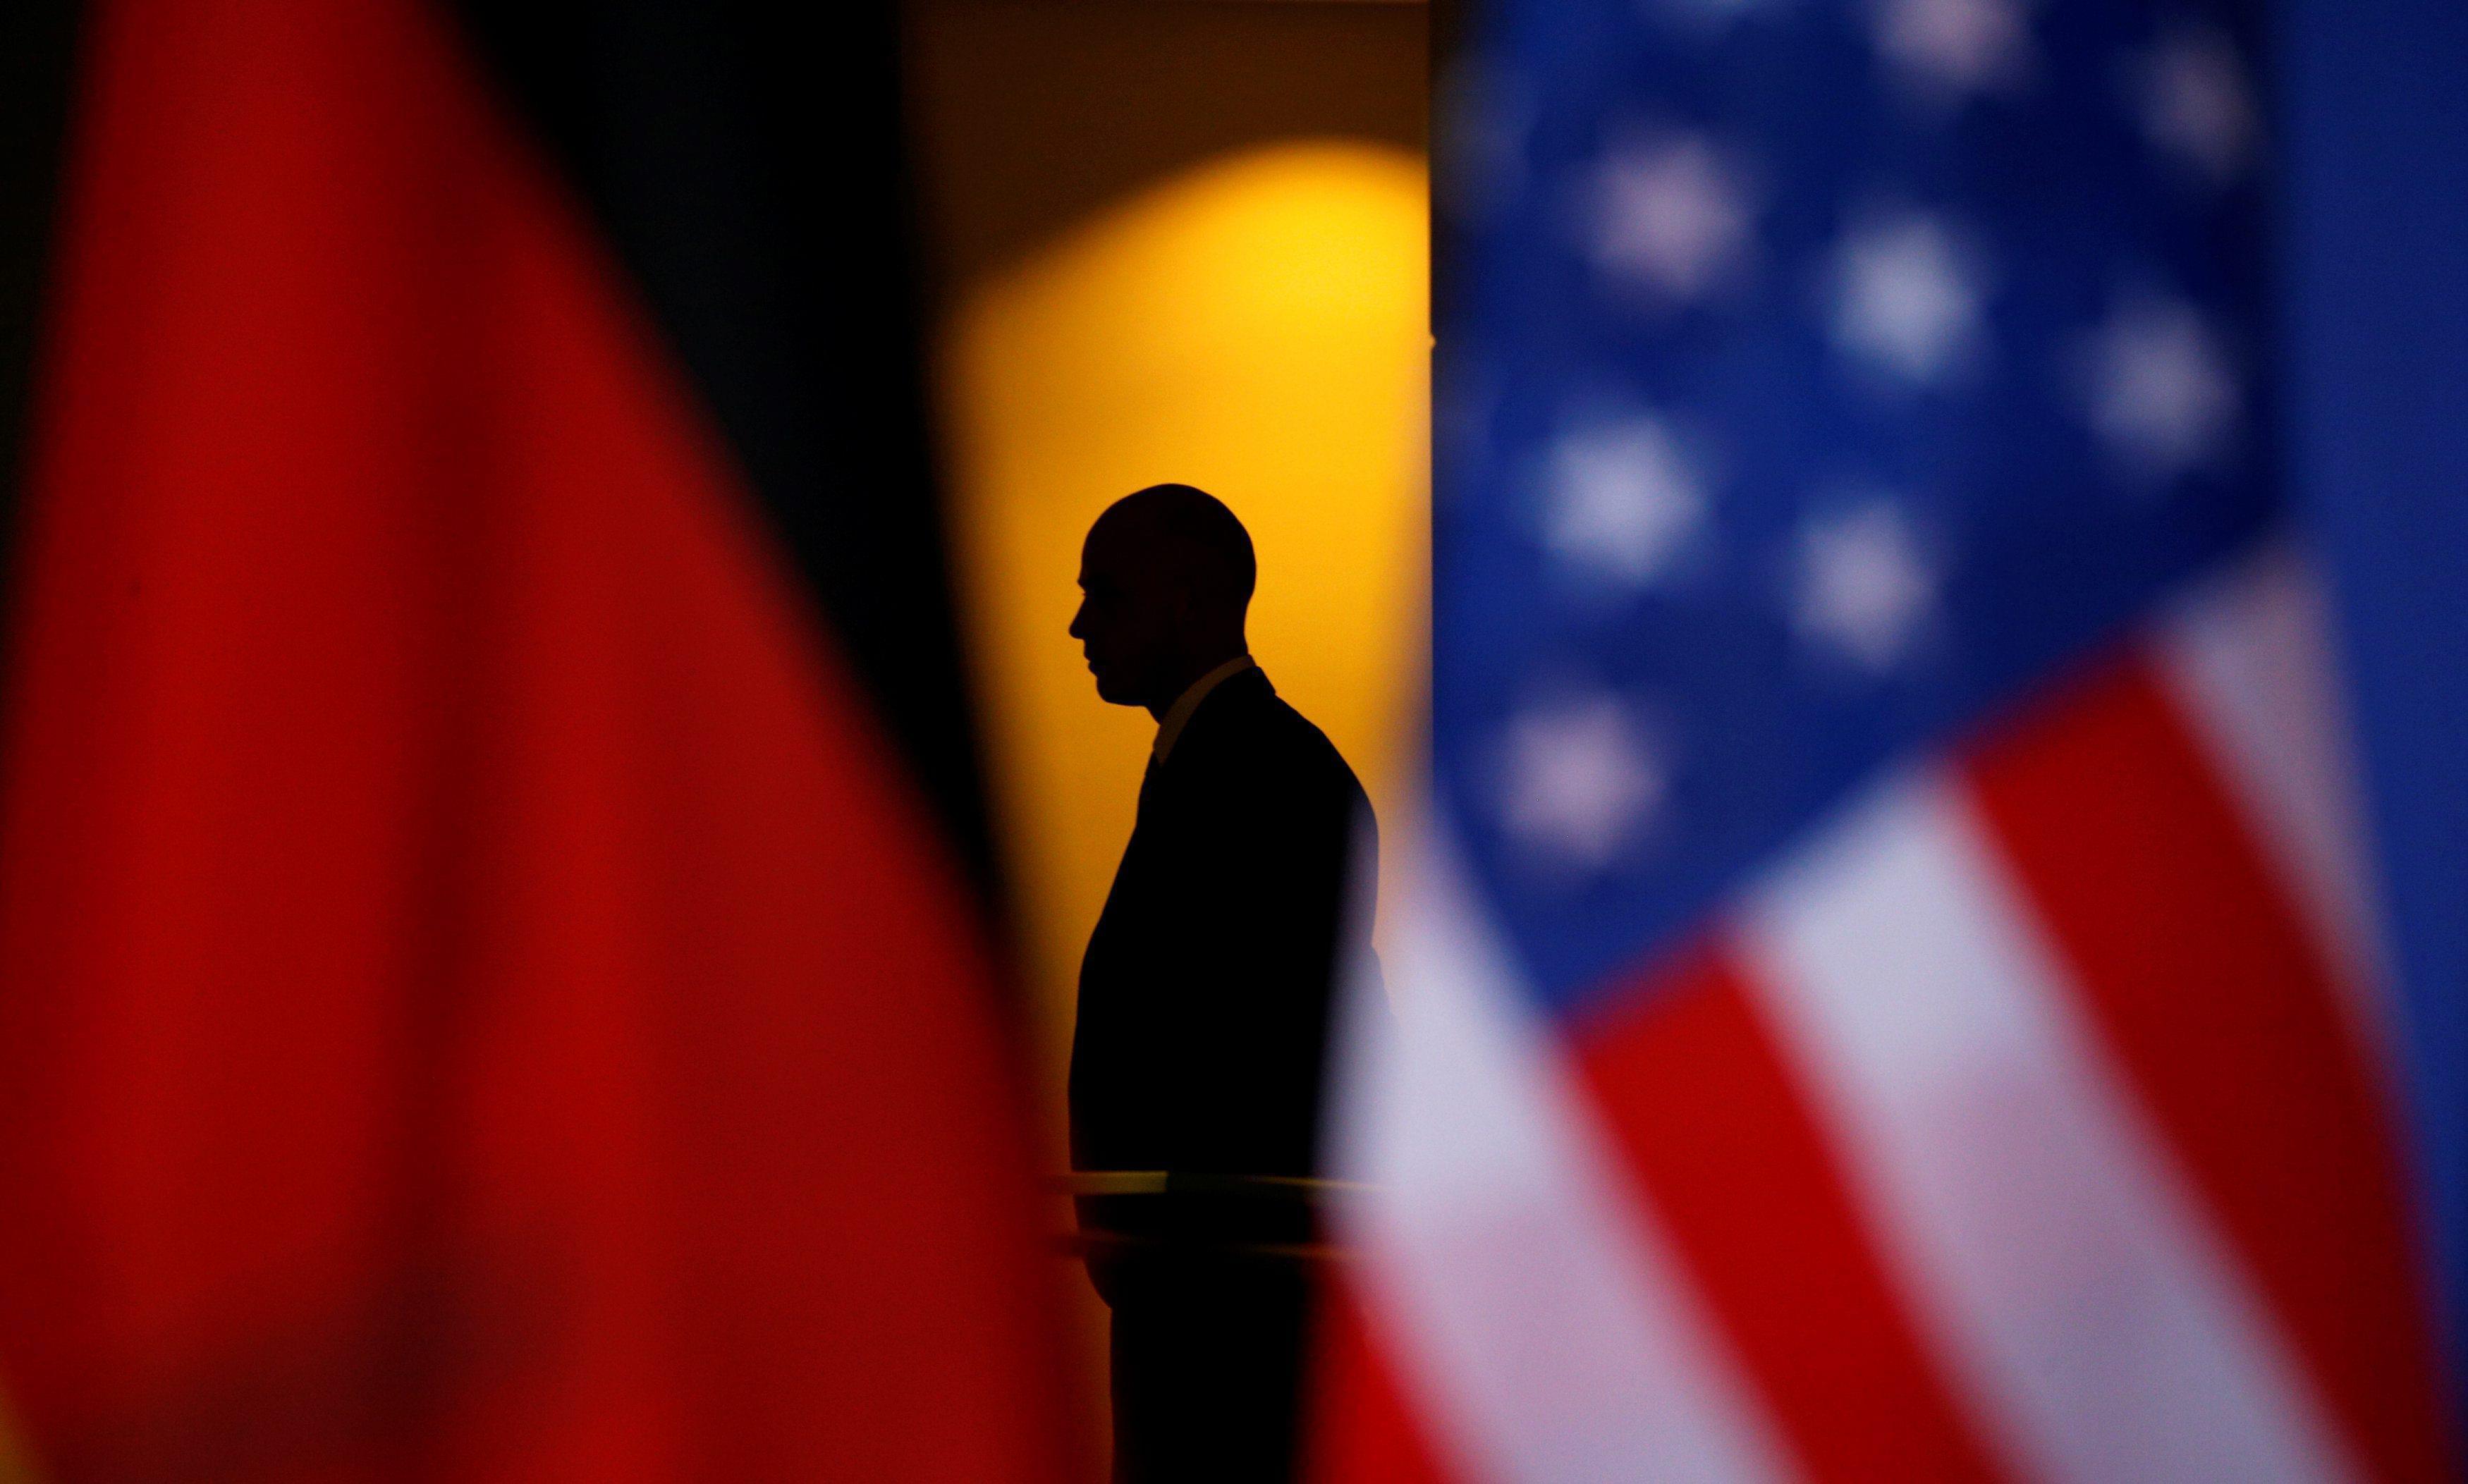 Obama and Merkel hold a joint press conference in Berlin, Germany